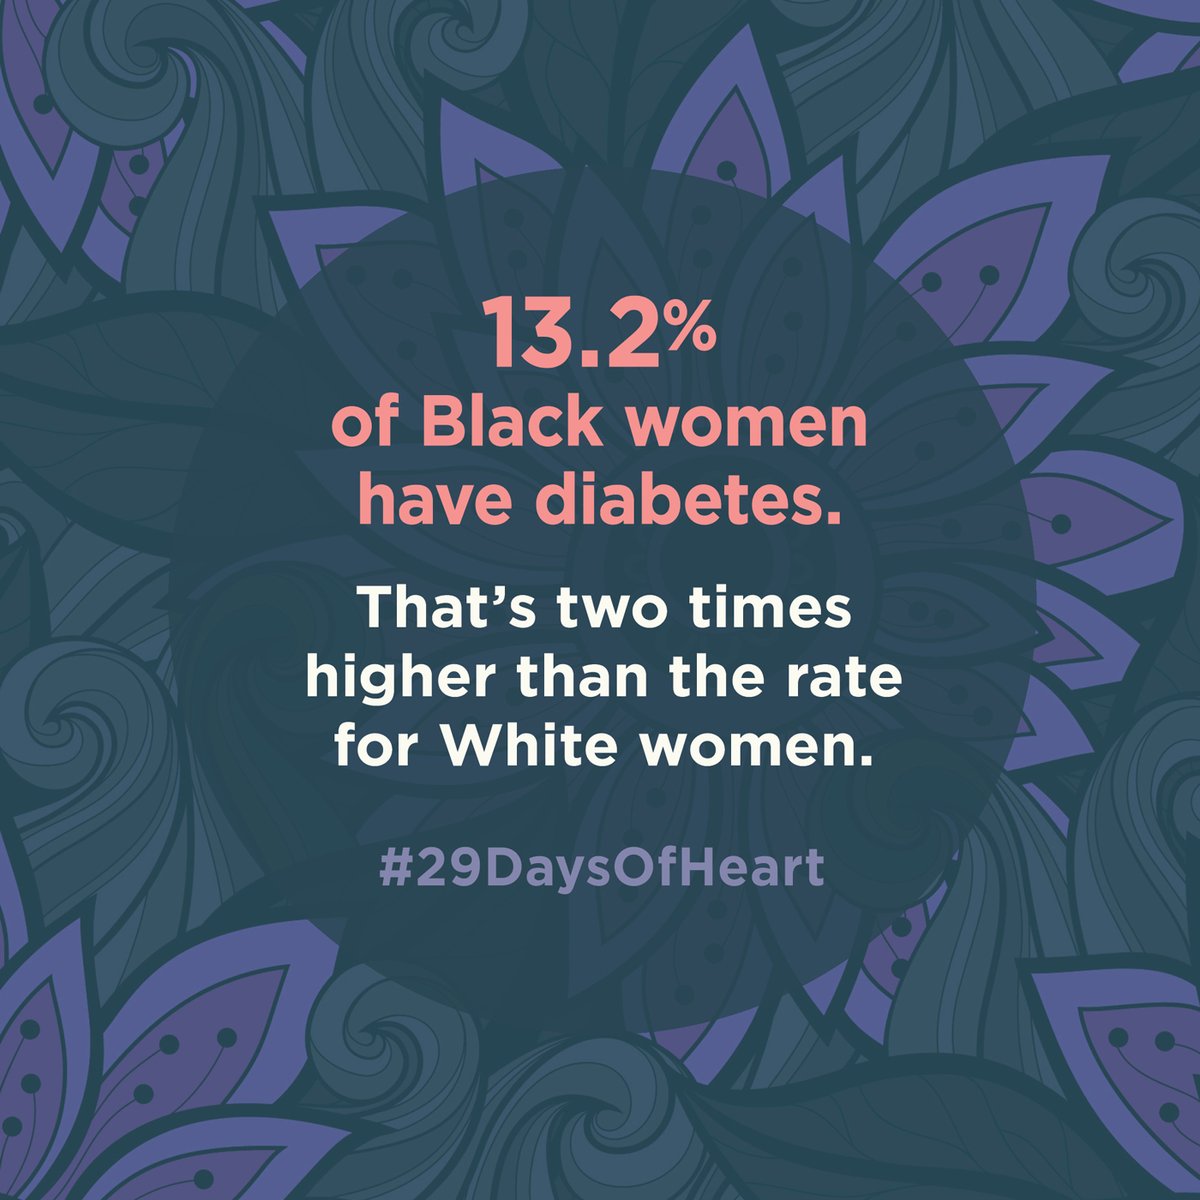 Health inequities persist. We can work together this #HeartMonth and #BlackHistoryMonth to raise awareness of the risks of heart disease so Black women are empowered to be heart healthy. #29DaysofHeart